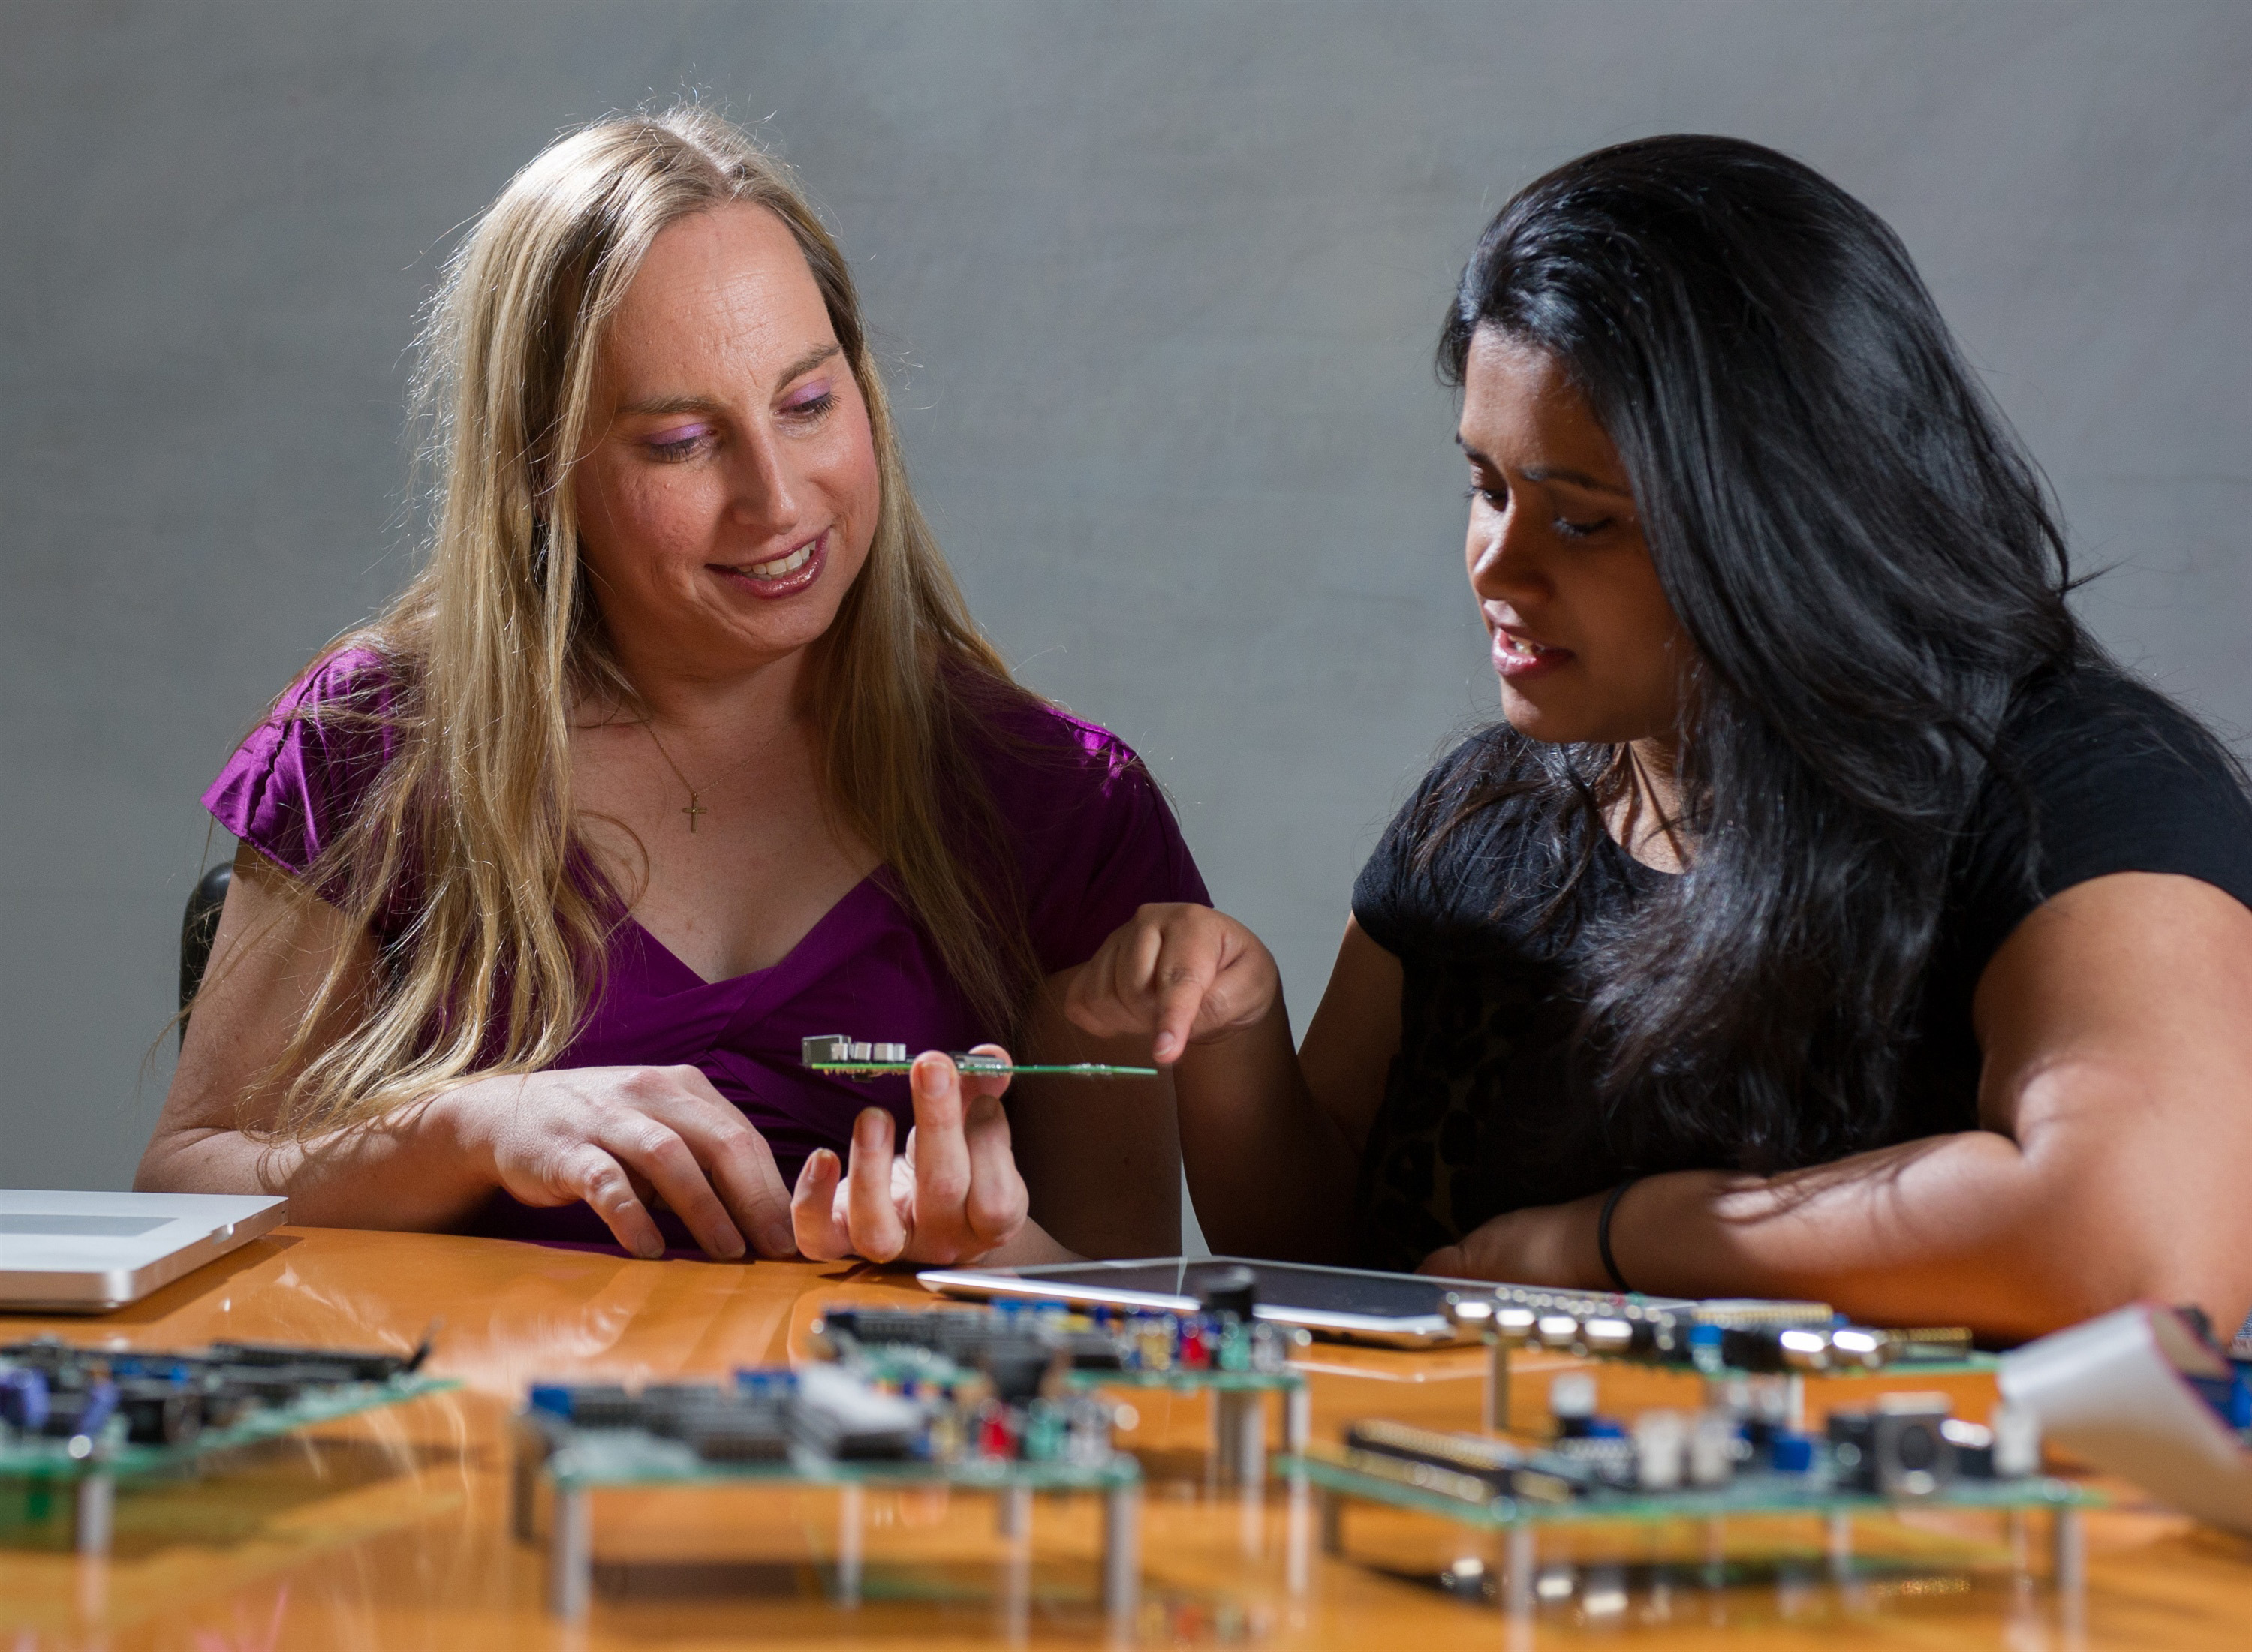 Professor Jennifer Hasler (left) and graduate student Suma George examine a field programmable analog array (FPAA) board that includes an integrated circuit with biological-based neuron structures for power-efficient calculation. Hasler’s research indicates that this type of board, which is programmable but has low power requirements, could play an important role in advancing neuromorphic computing. (Georgia Tech Photo: Rob Felt)